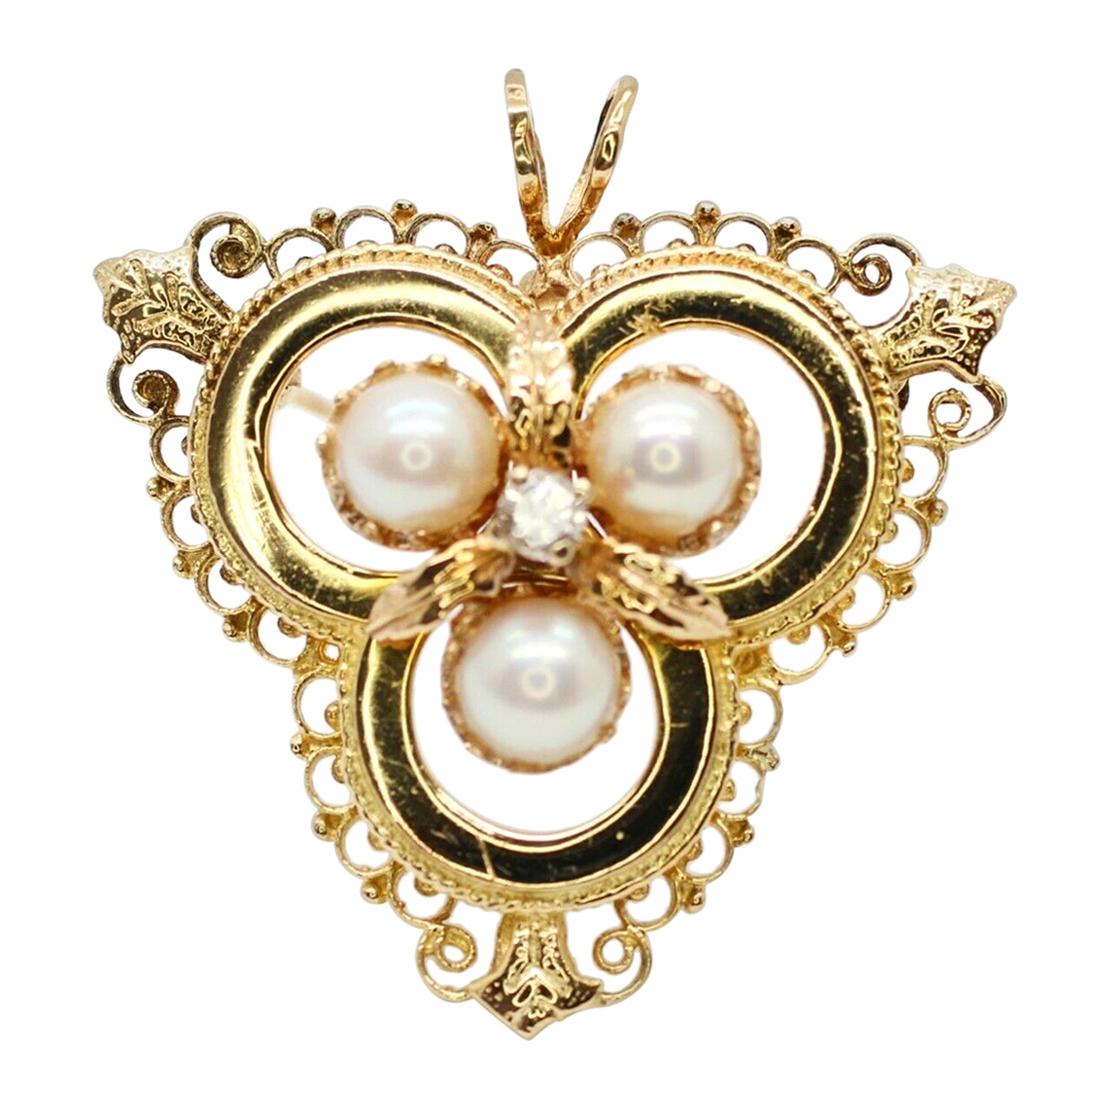 This Antique 14 Karat Yellow Gold Brooch with Pearls and Diamonds in the Center